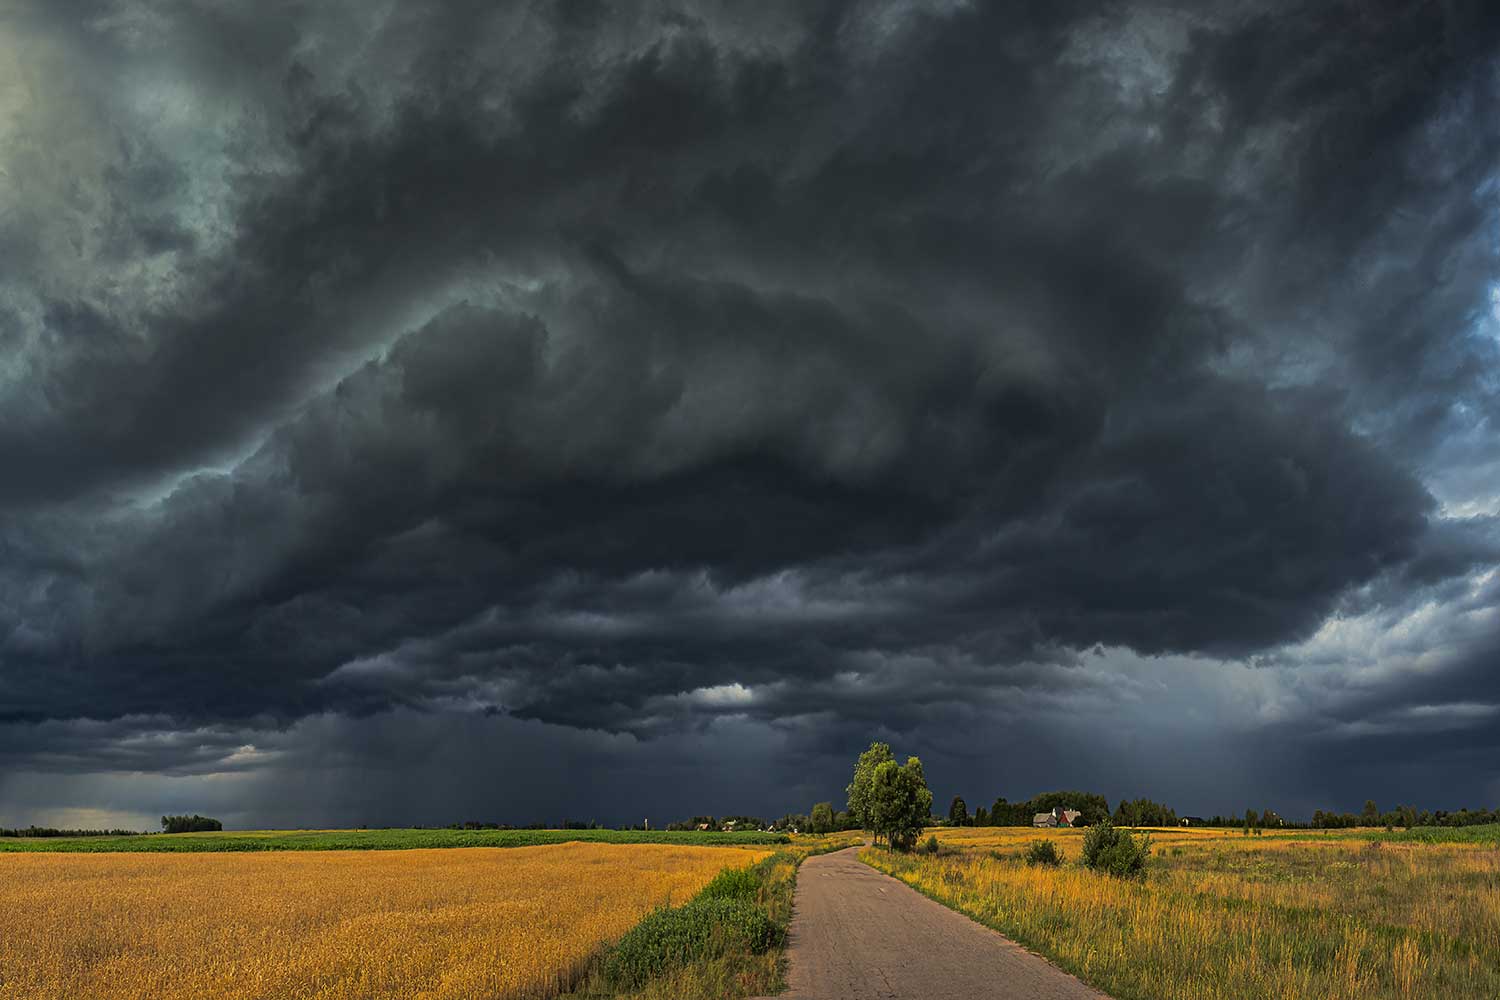 Dark storm clouds above a country road